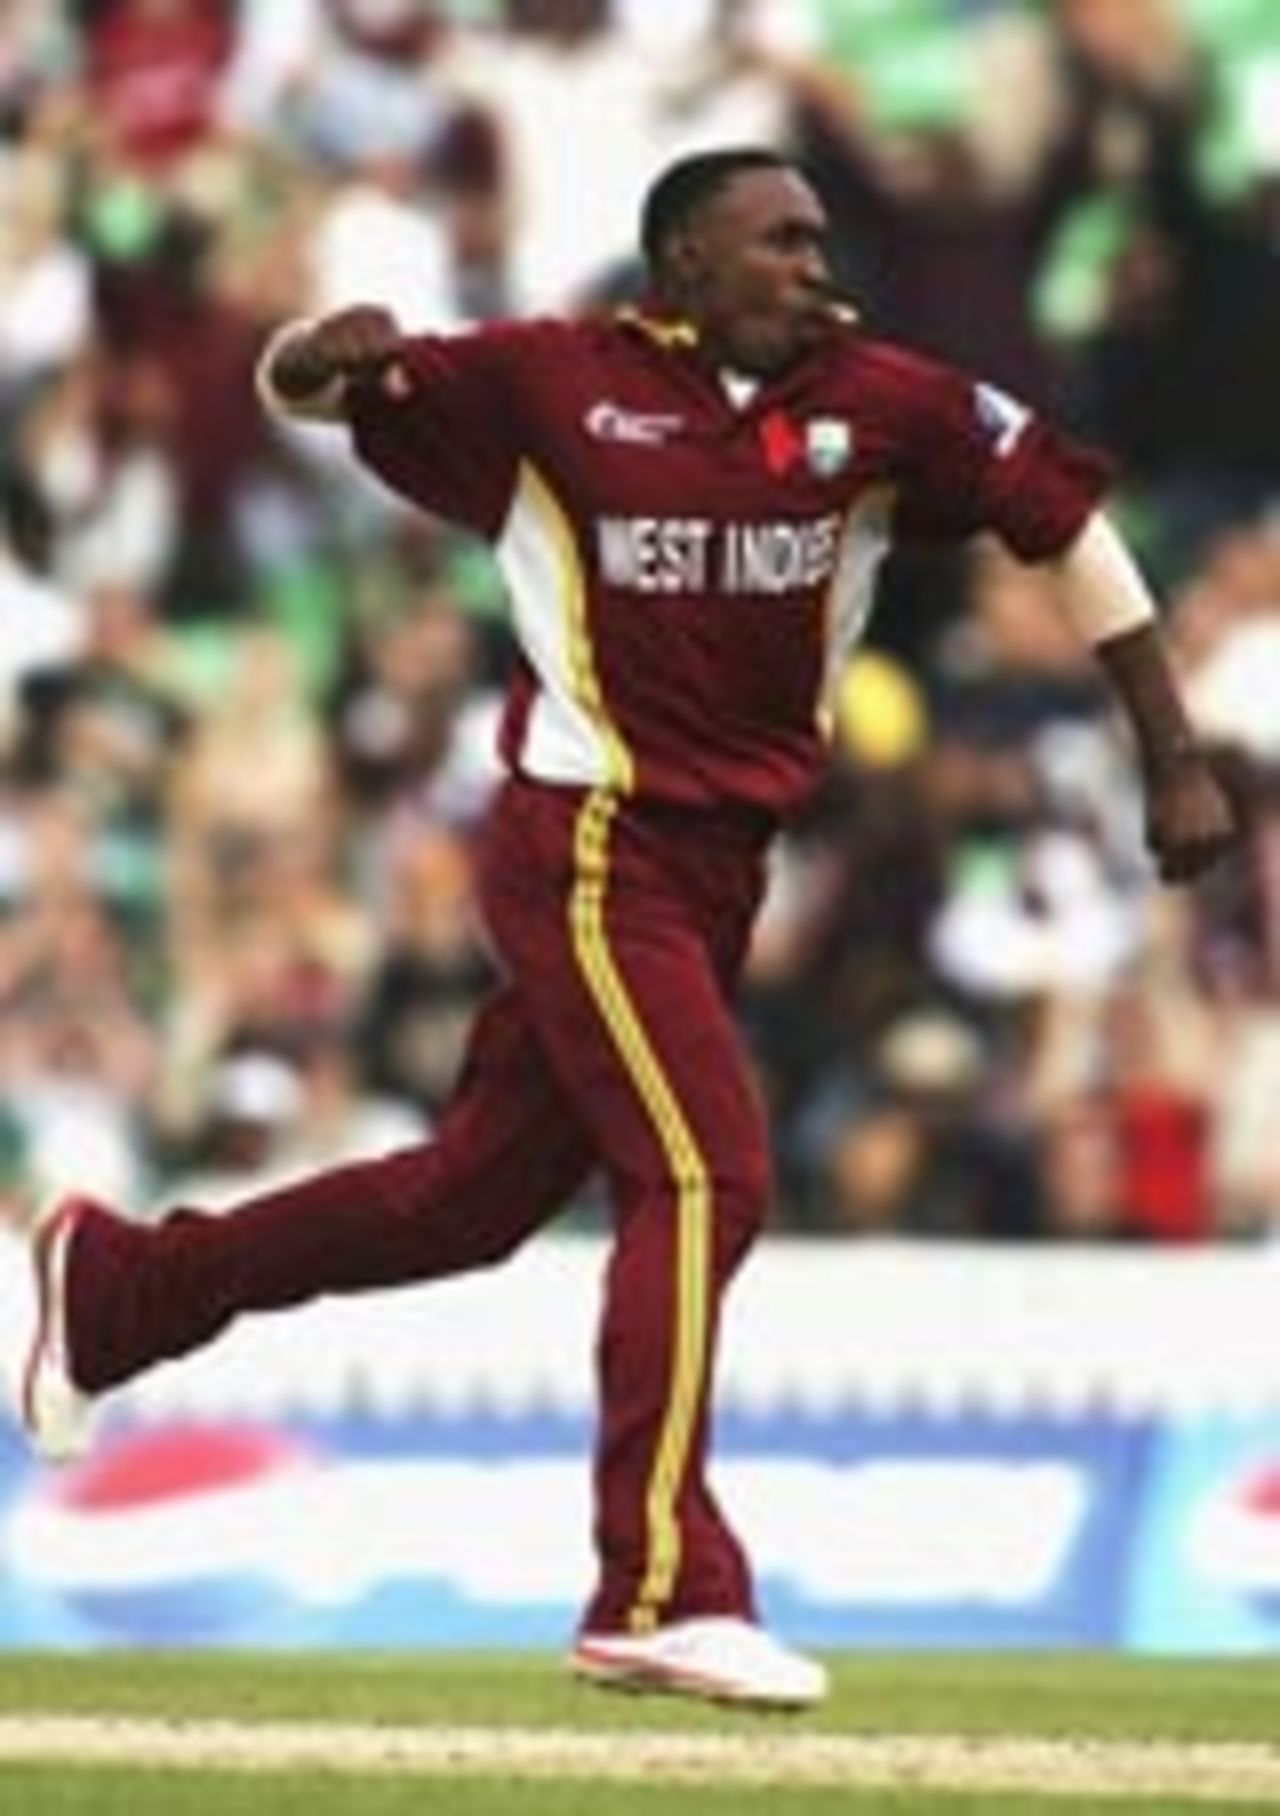 Dwayne Bravo celebrates the wicket of Jacques Kallis, West Indies v South Africa, ICC Champions Trophy, September 18 2004